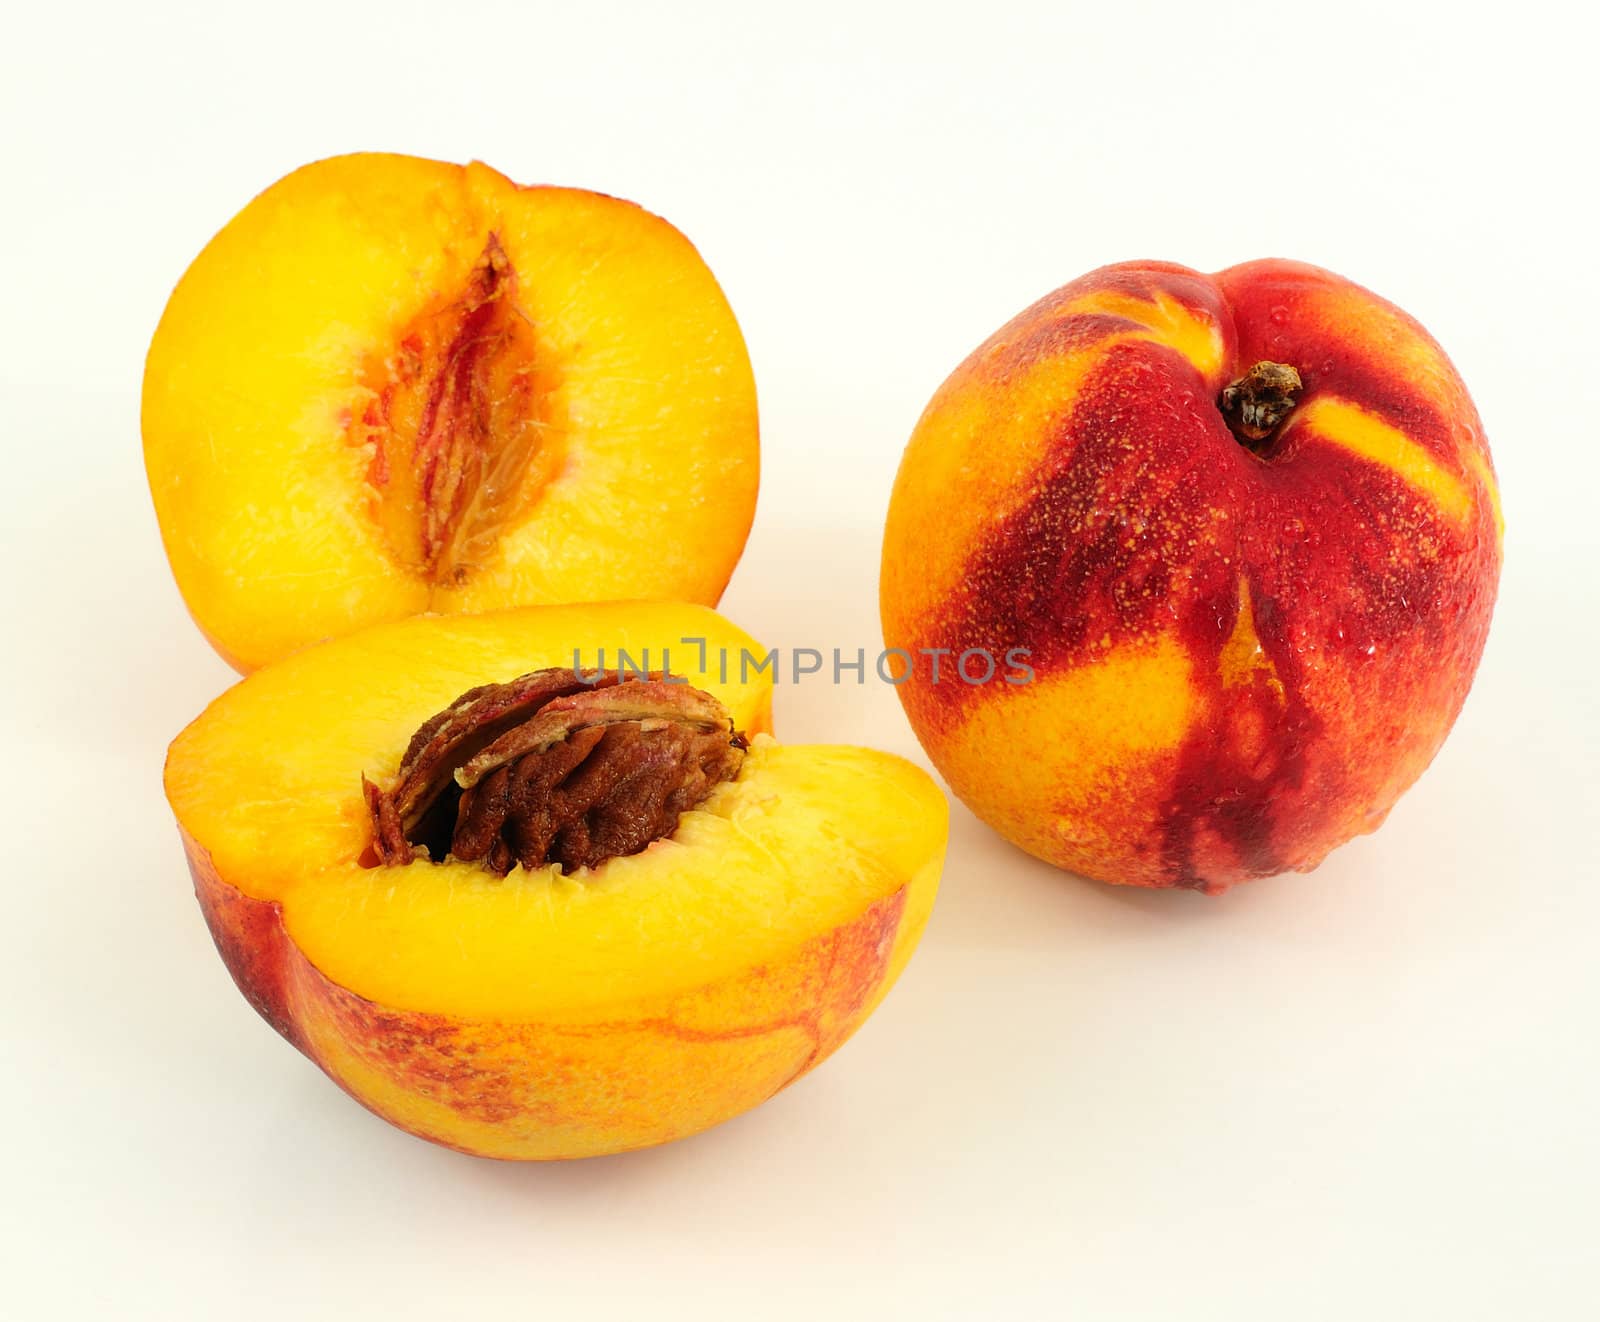 Juicy fresh nectarines, whole and cut, over white background